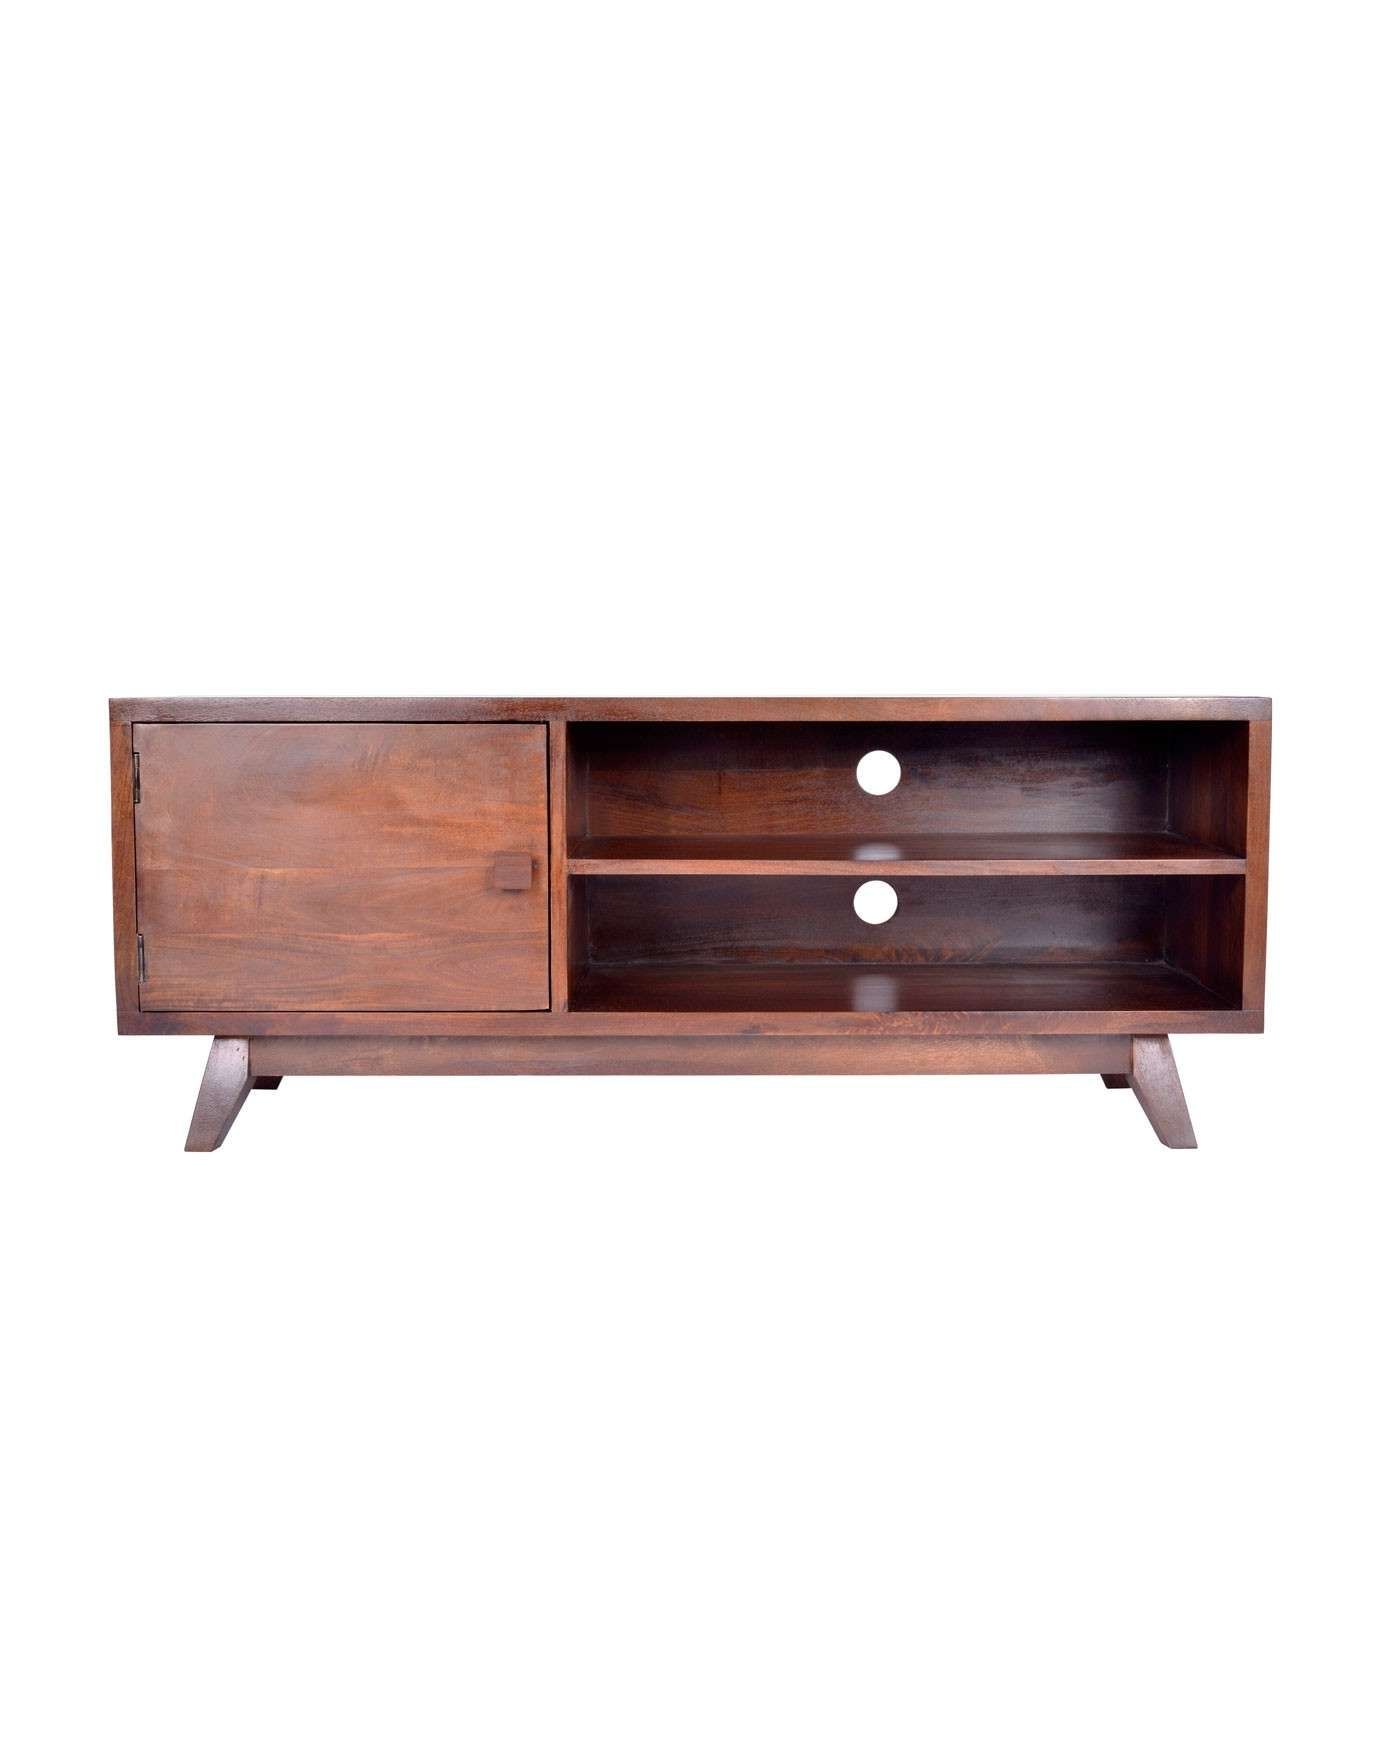 Dark Wood Tv Stand With Shelf Retro Design 100% Solid Wood Pertaining To Dark Tv Stands (View 13 of 15)